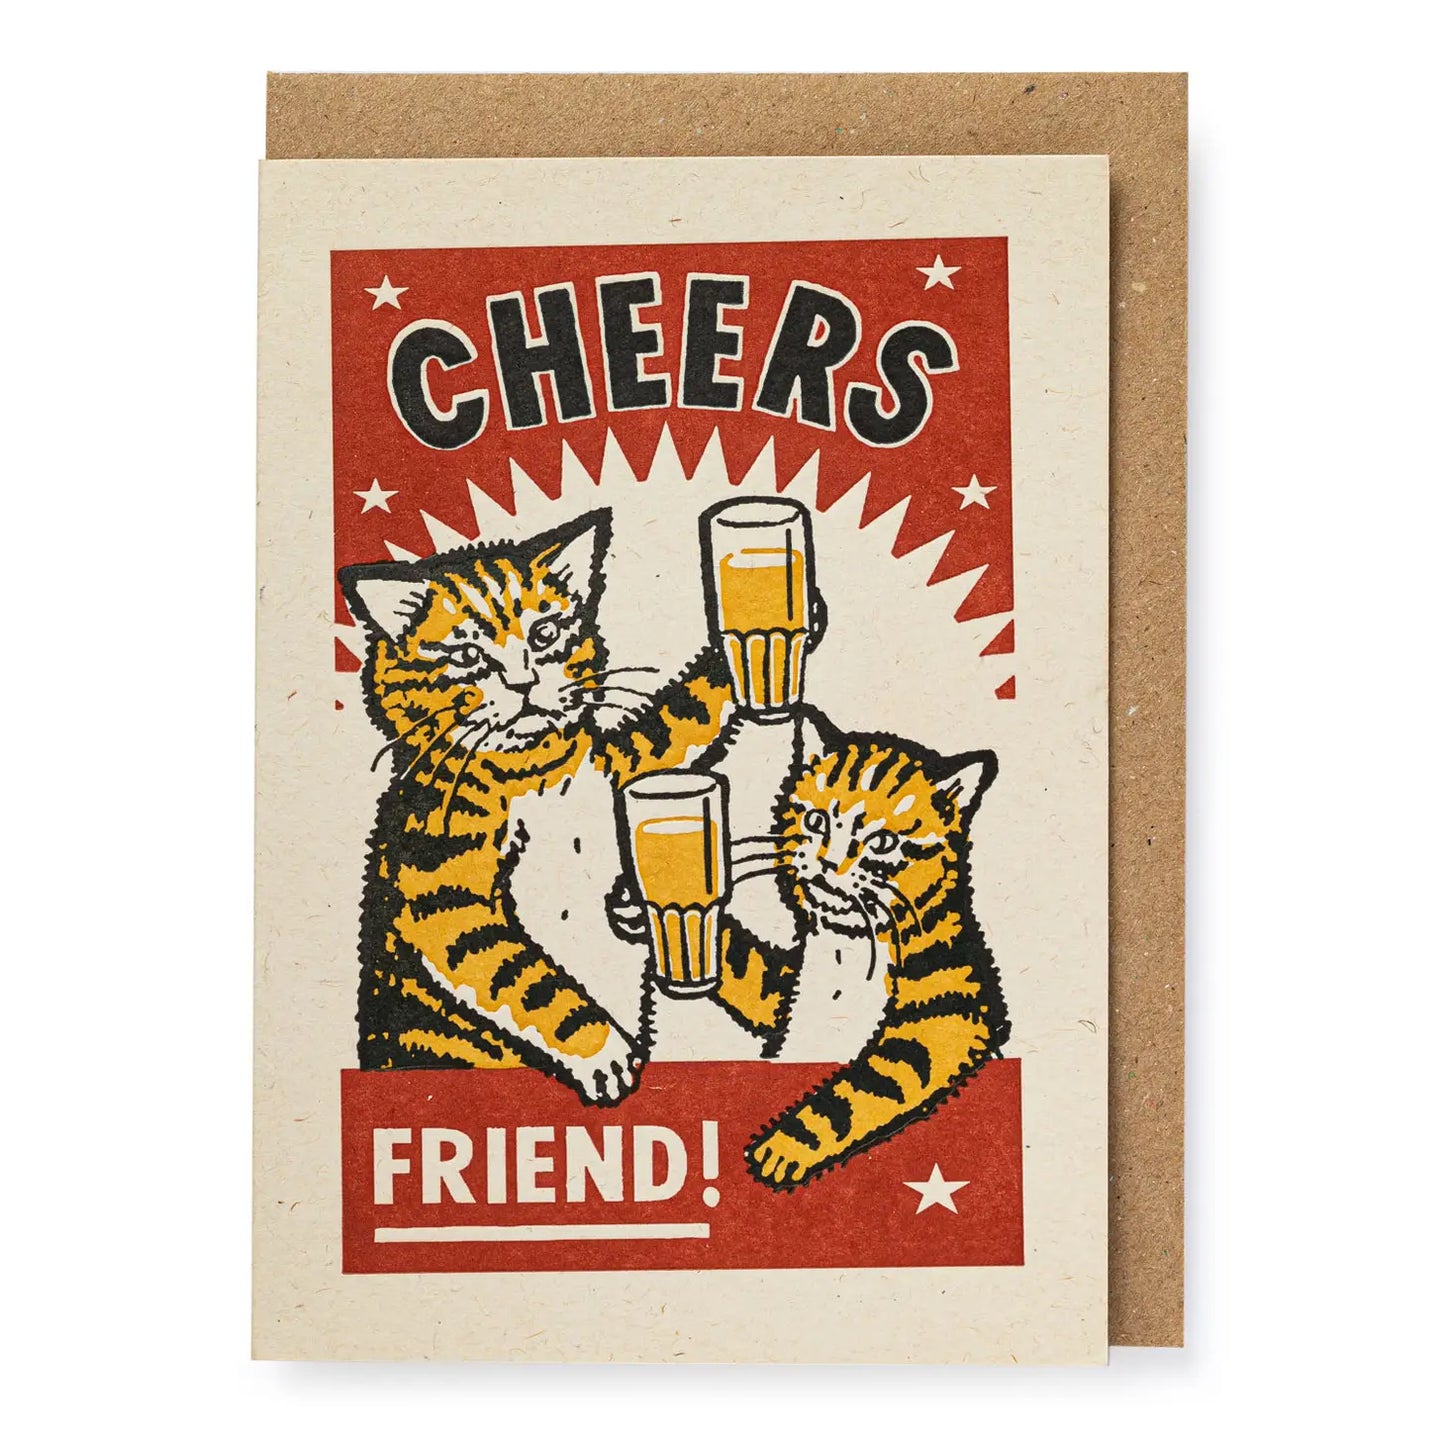 CHEERS FRIEND GREETING CARD ARCHIVIST GALLERY